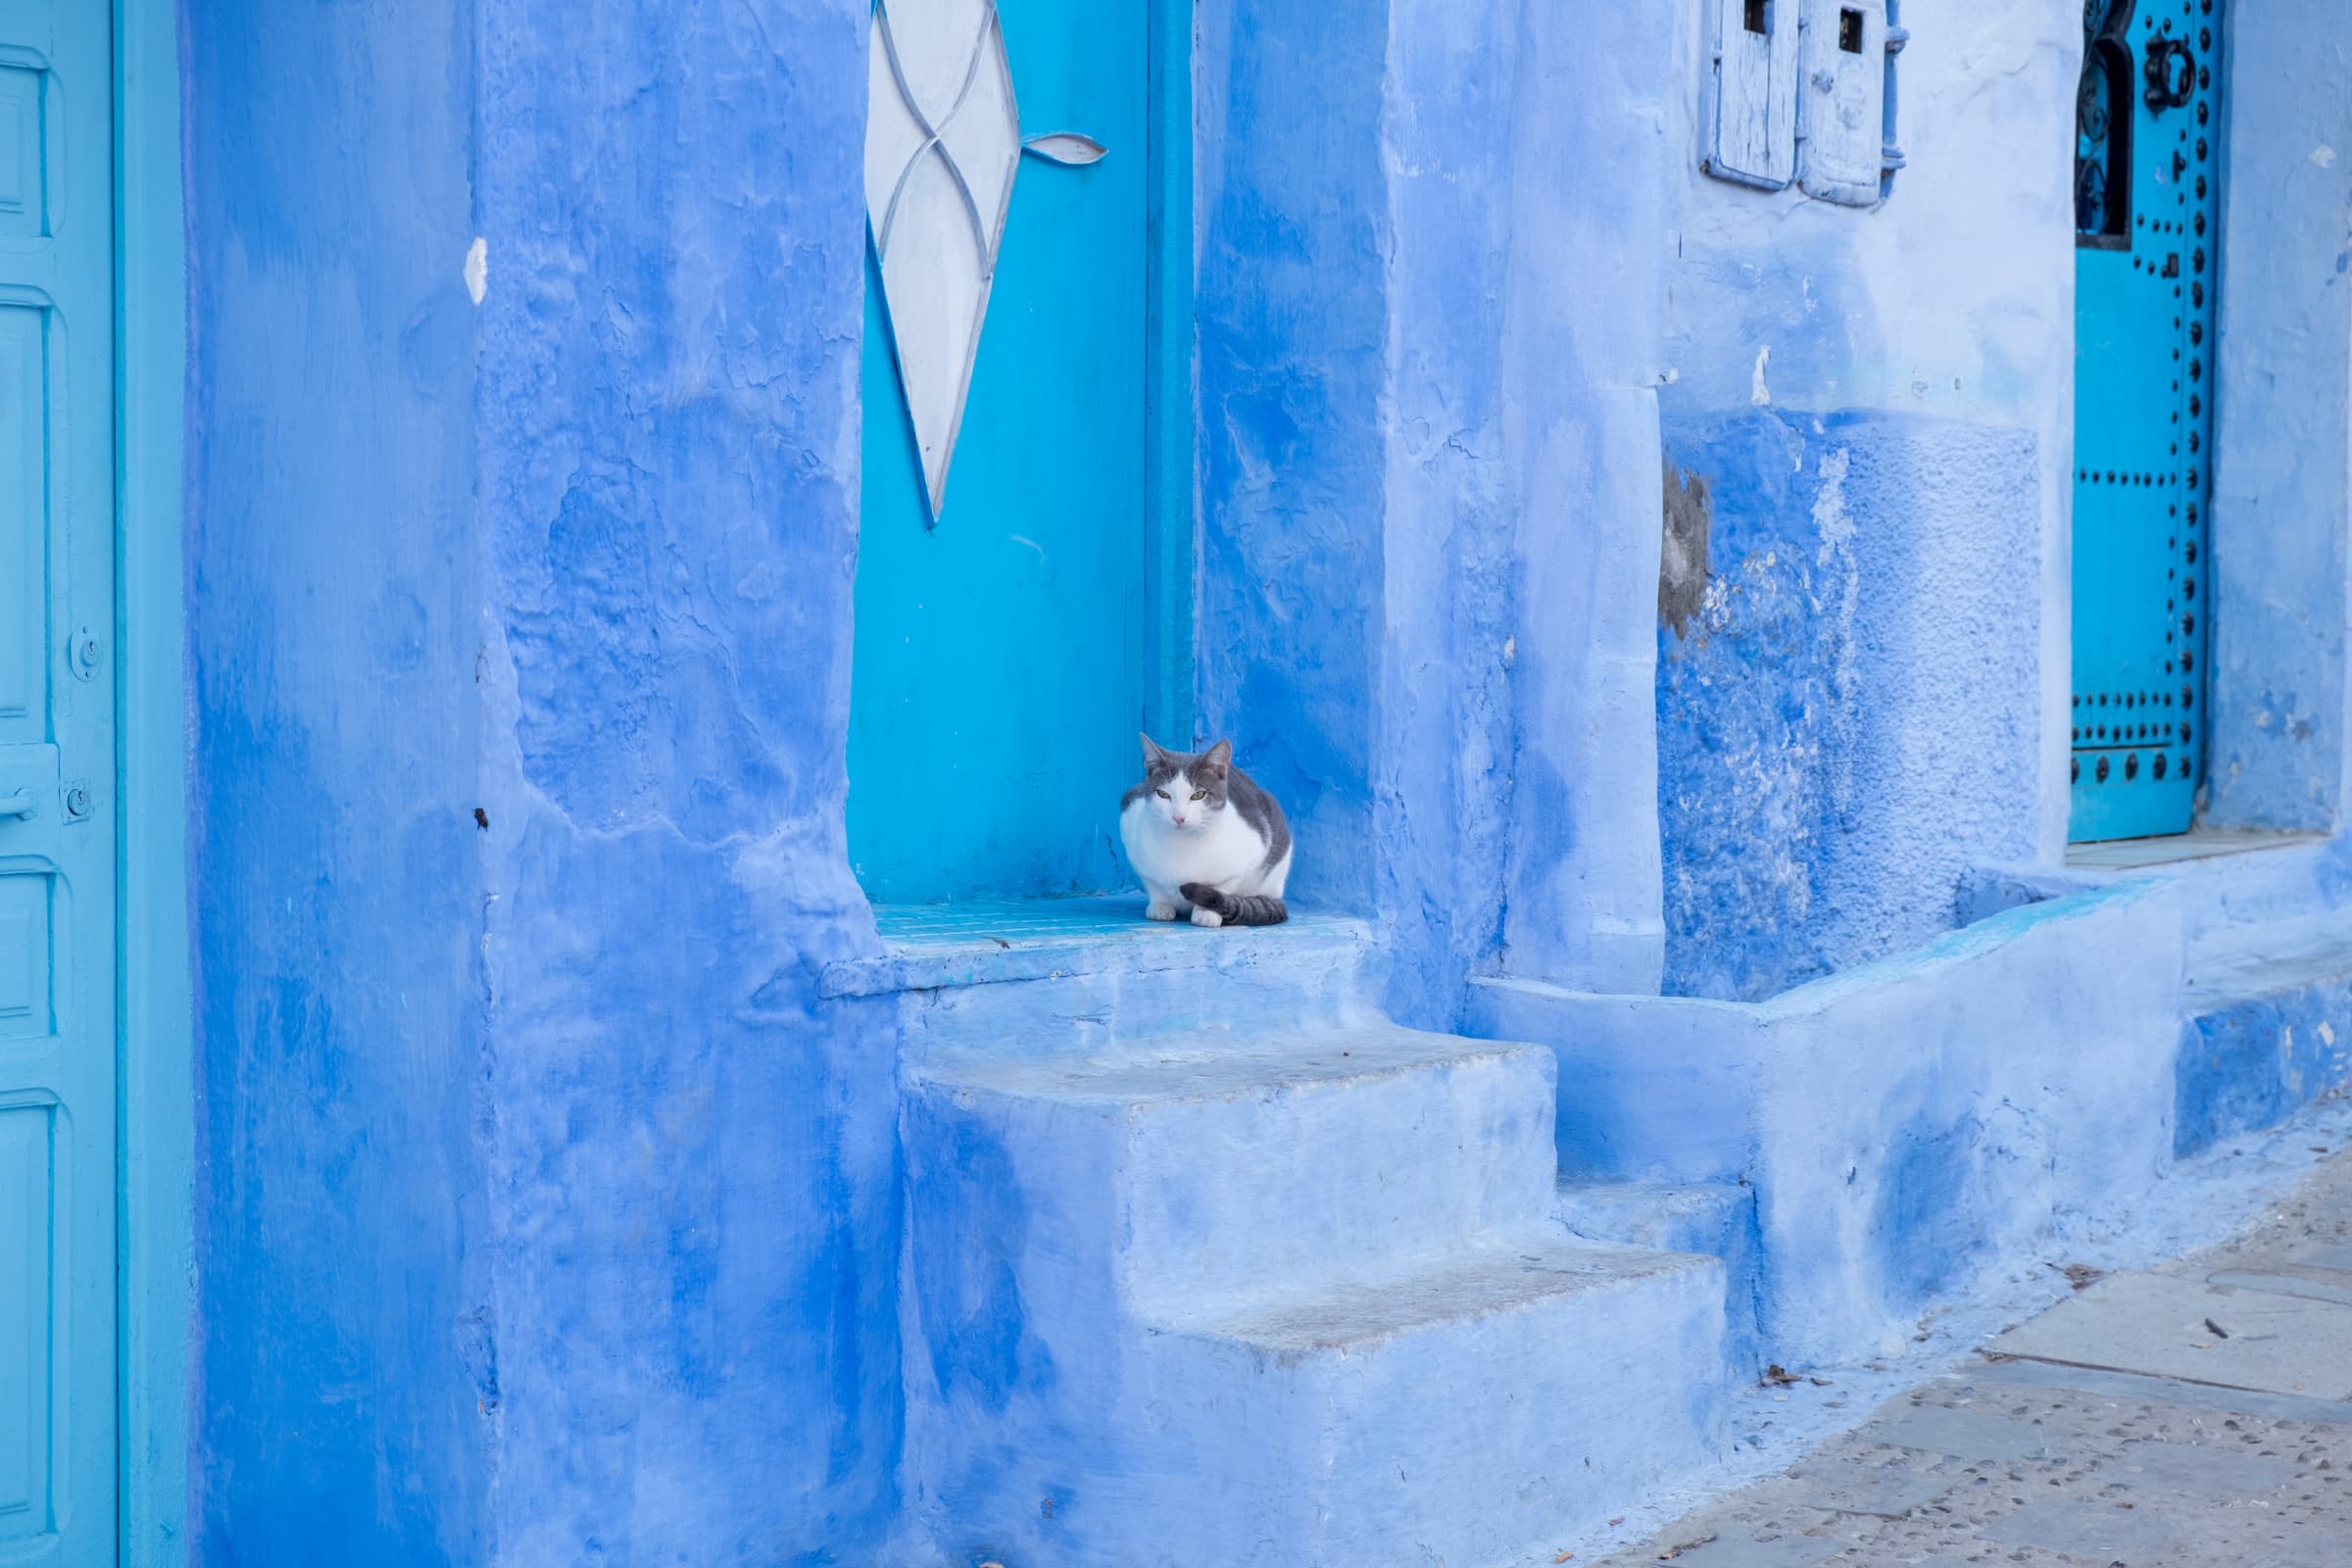 A cat sitting in a blue doorway, Chefchaouen, Morocco